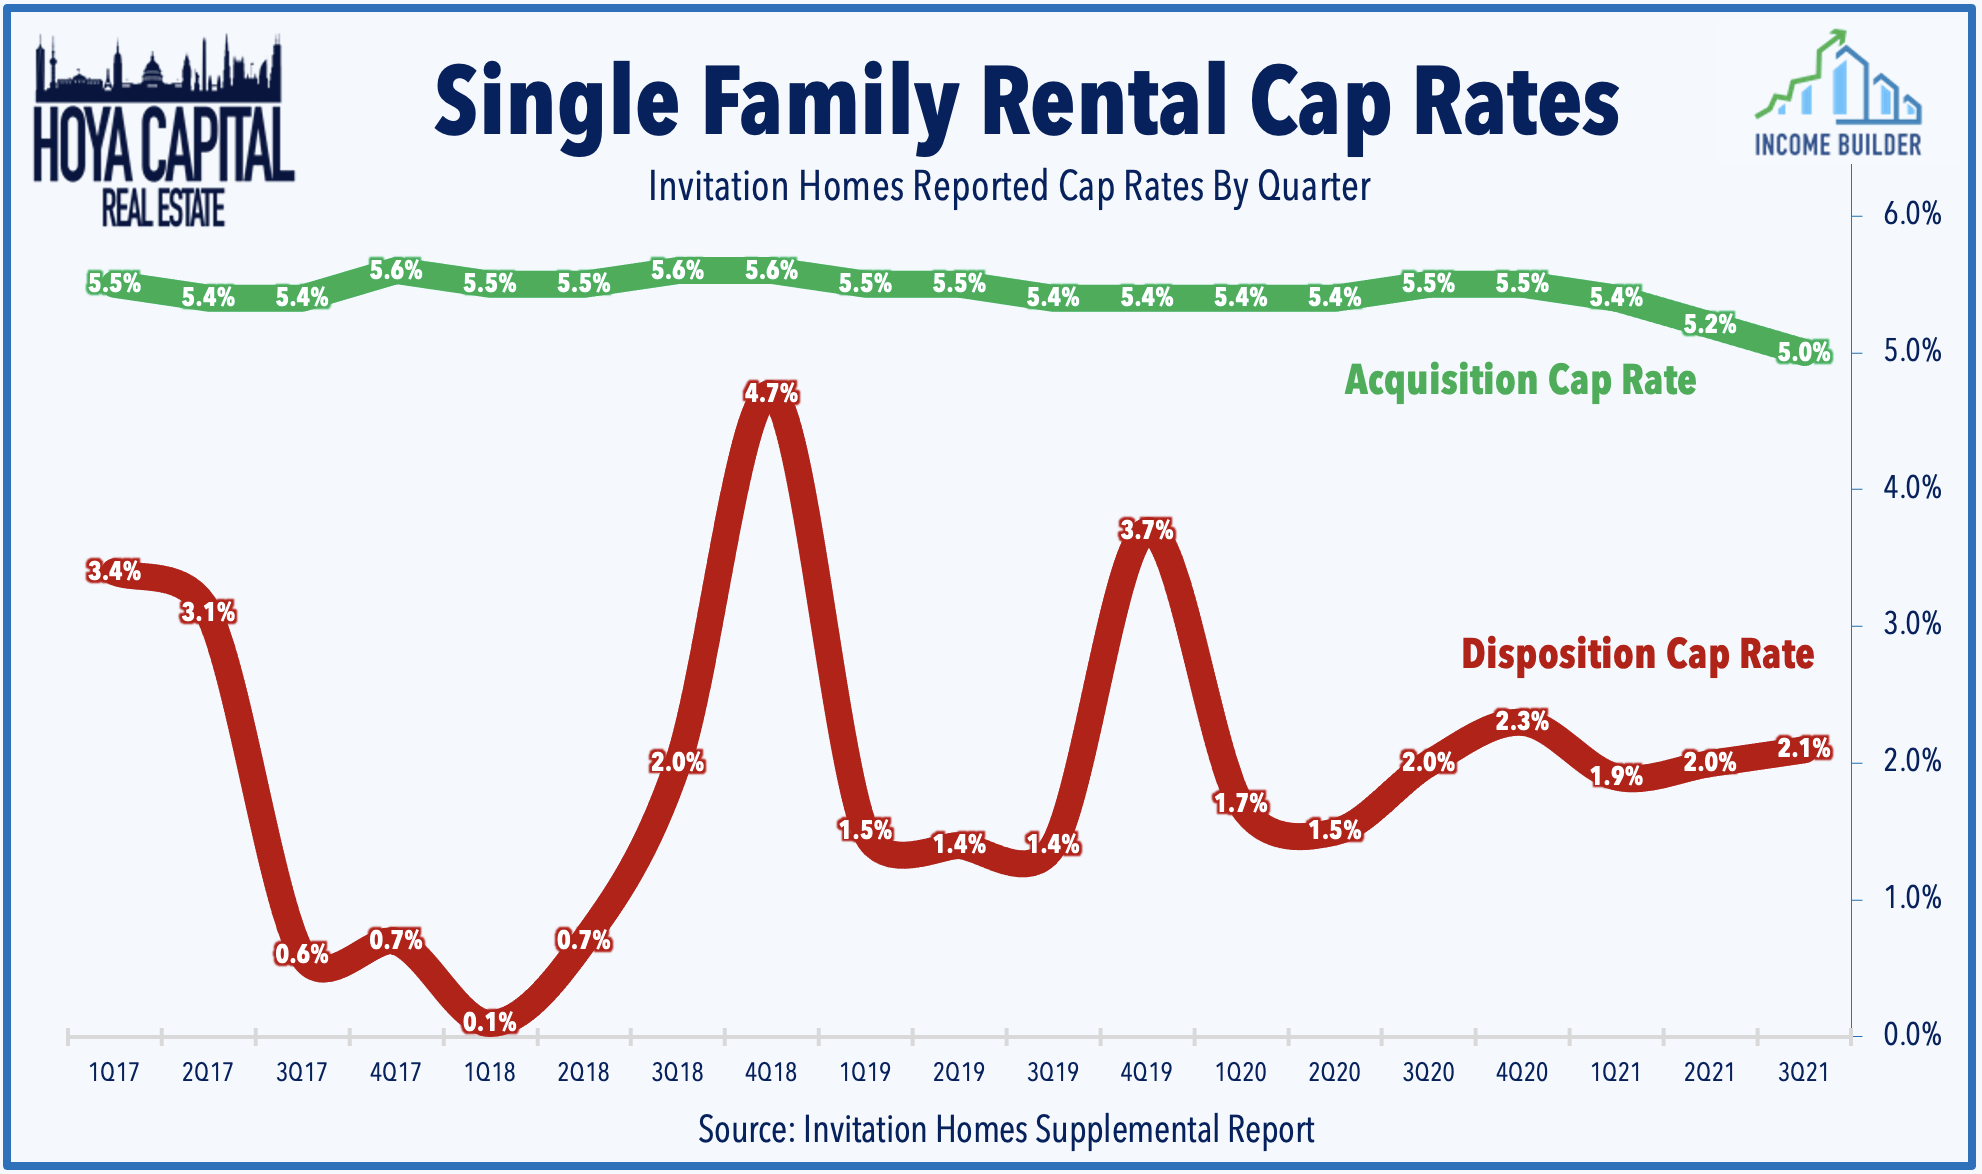 Line chart showing INVH acquisition cap rate consistently 5.0 - 5.6%, with disposition cap rates ranging from 0.1% to 4.7%